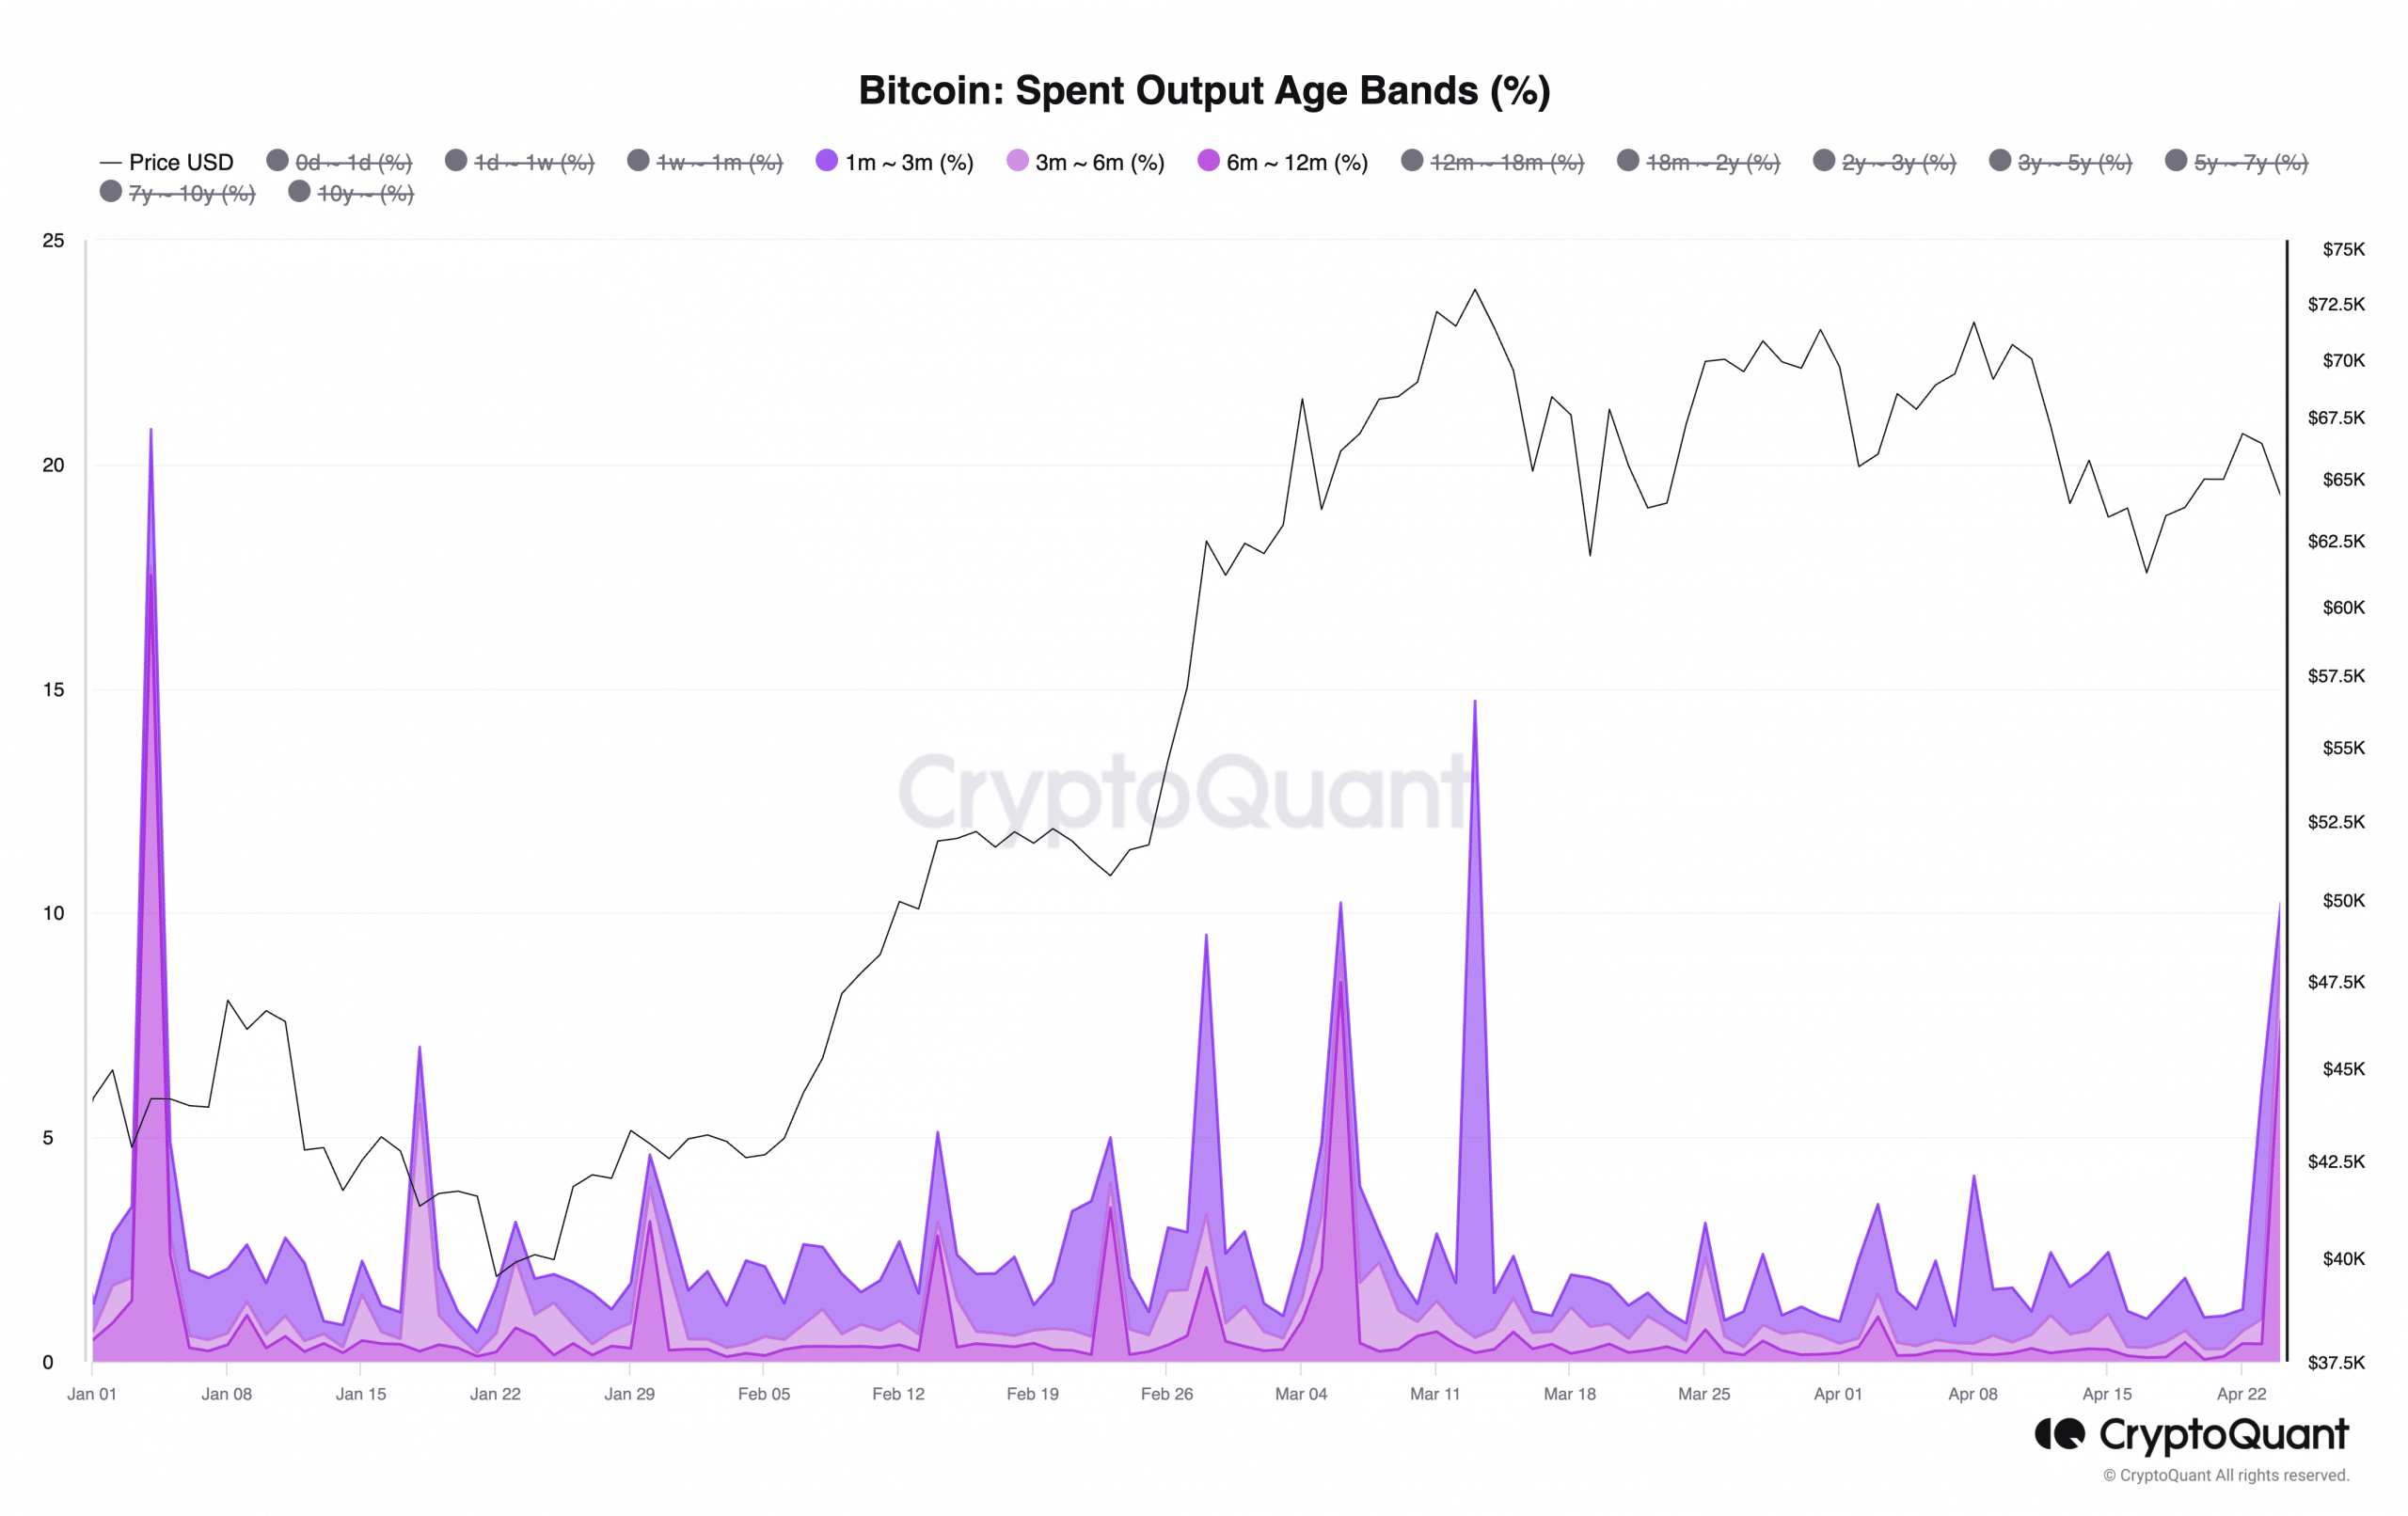 Bitcoin spent output age groups